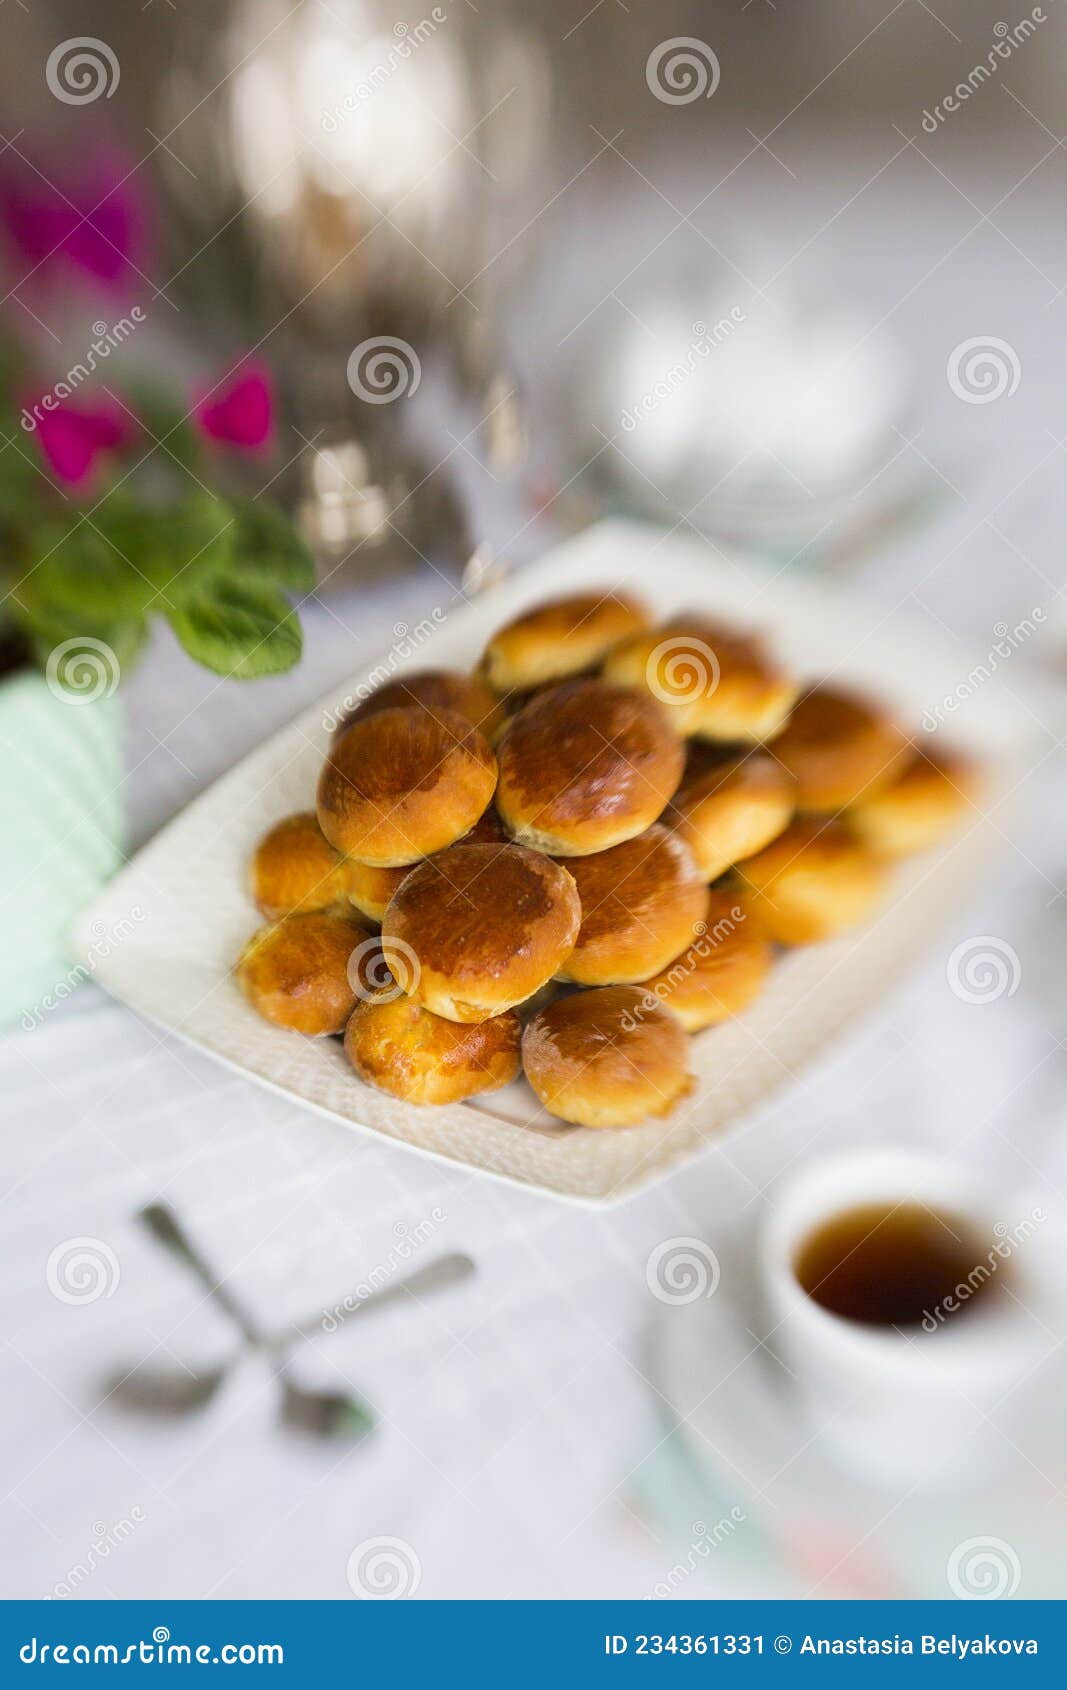 russian traditional teaparty with samovar and pies or pirozhki with apple jam